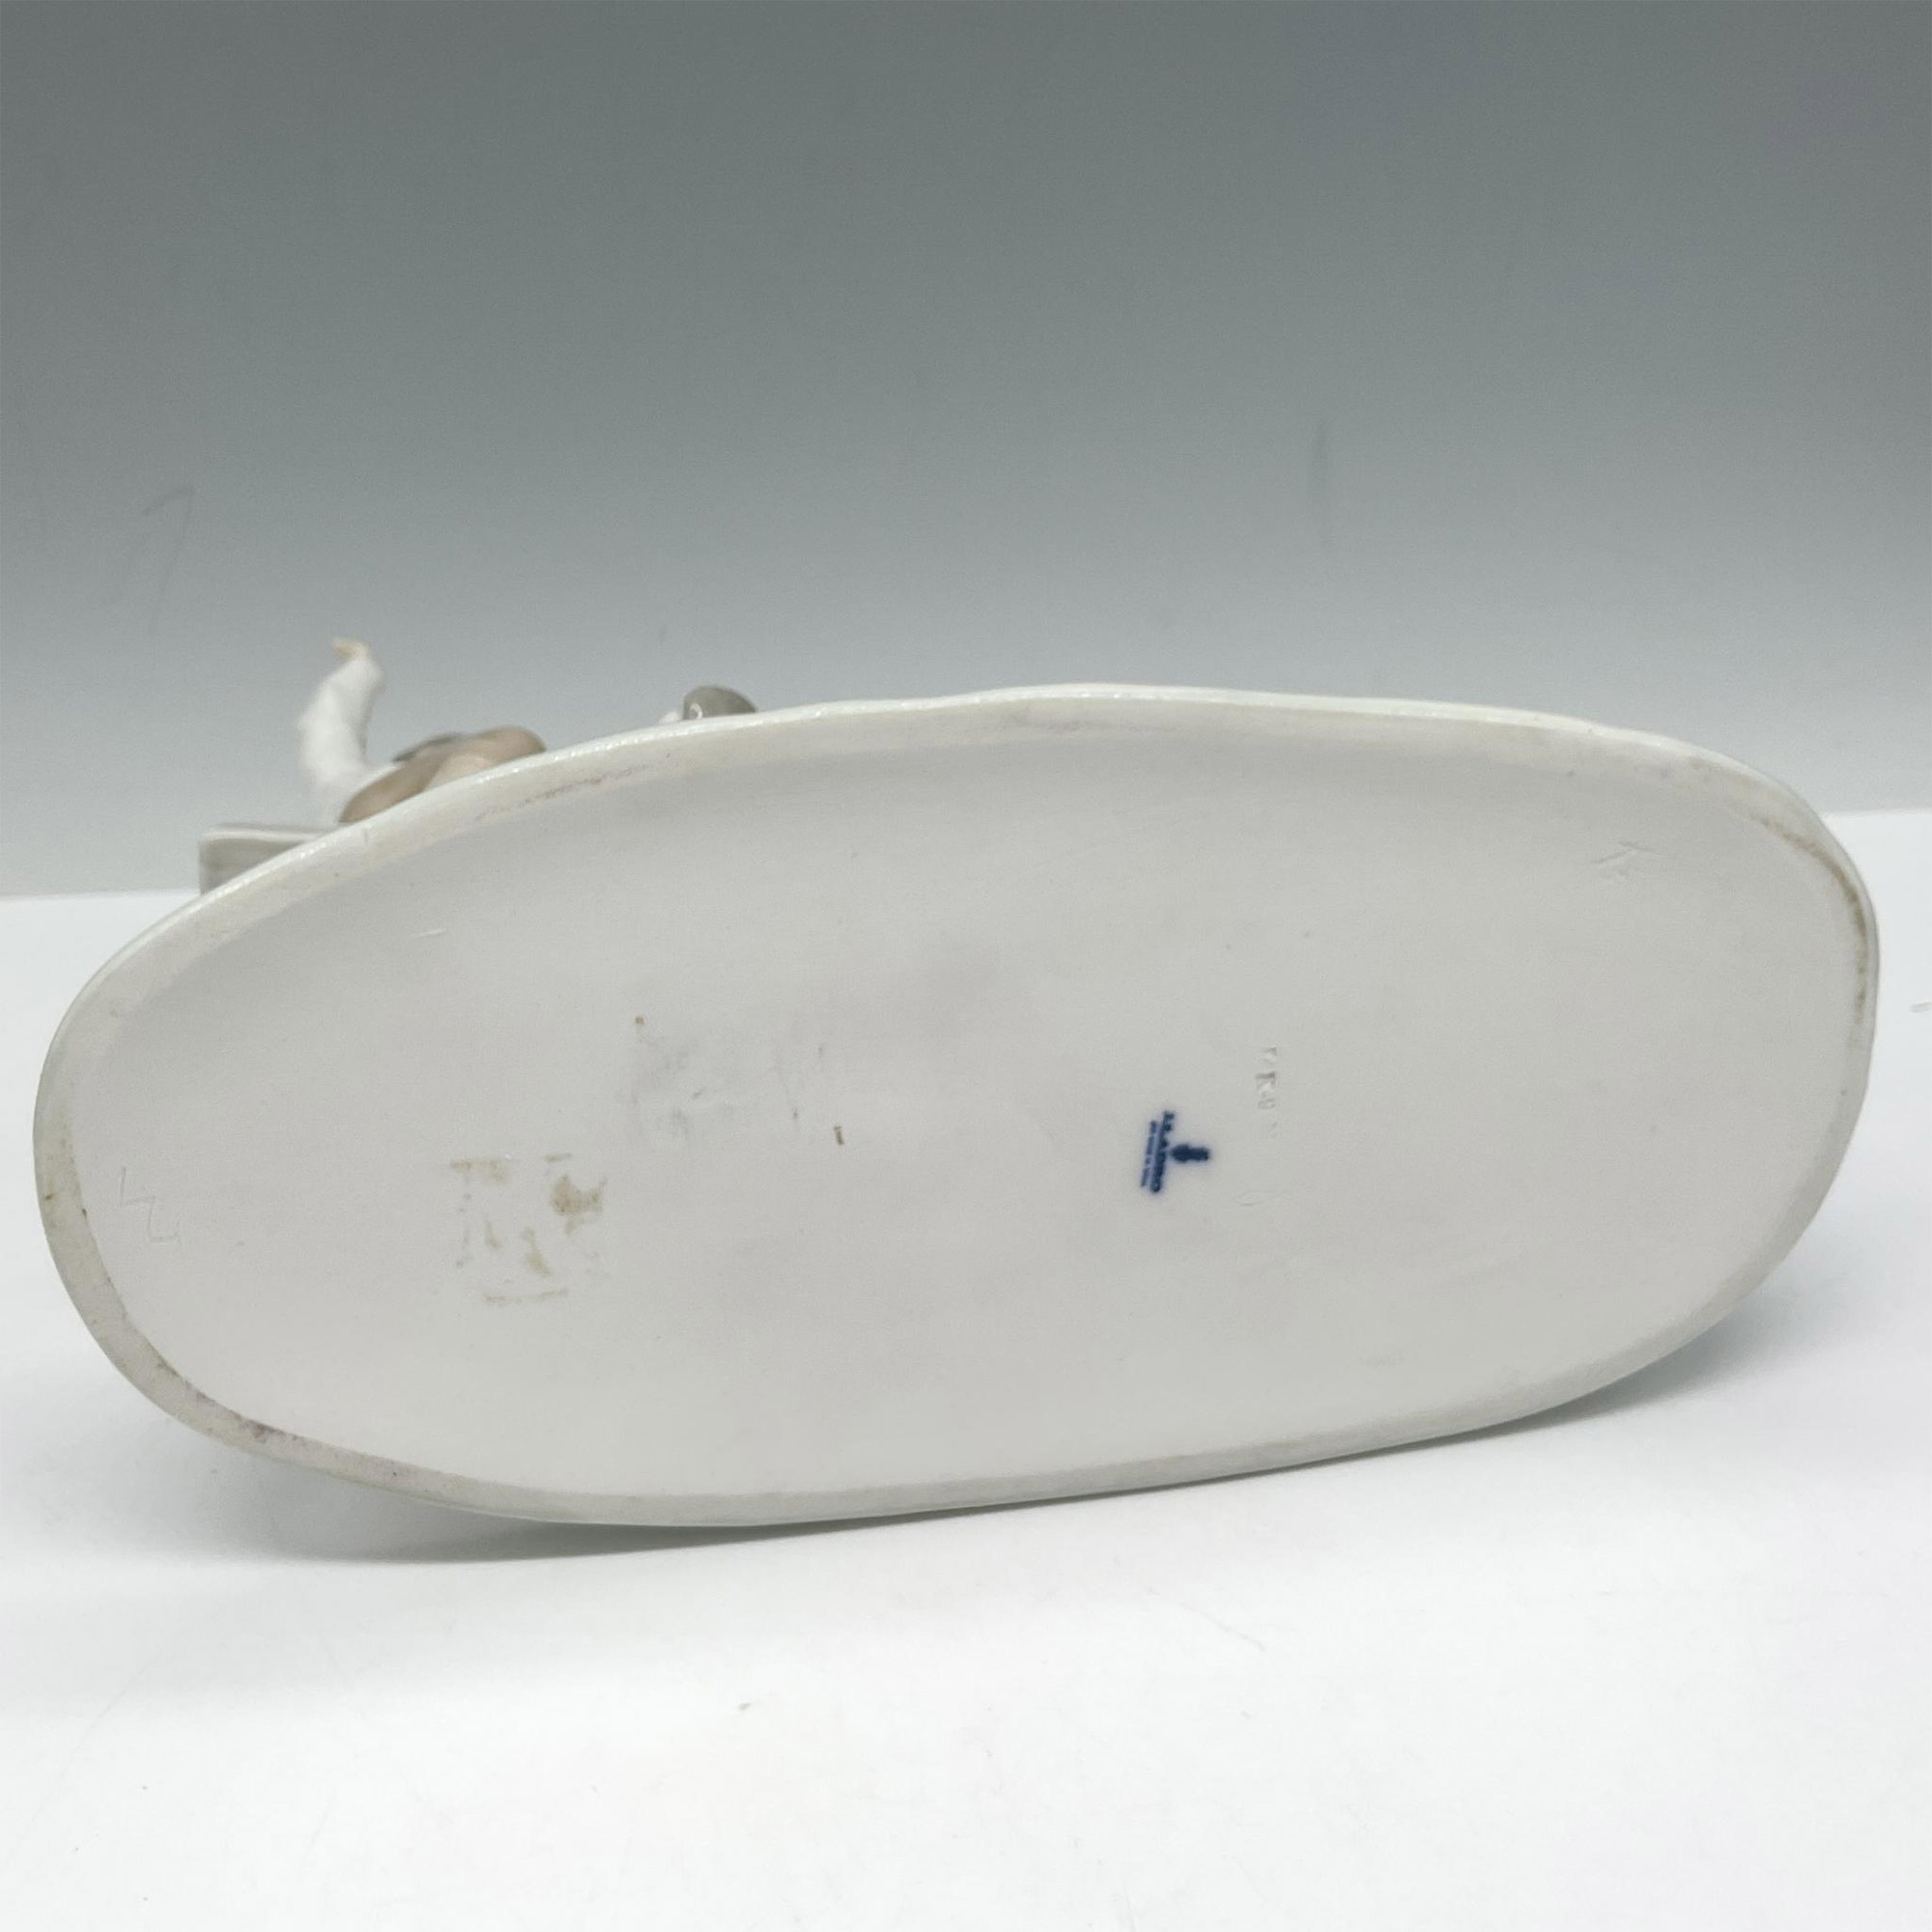 See-Saw 1004867 - Lladro Porcelain Figurine - Image 3 of 4